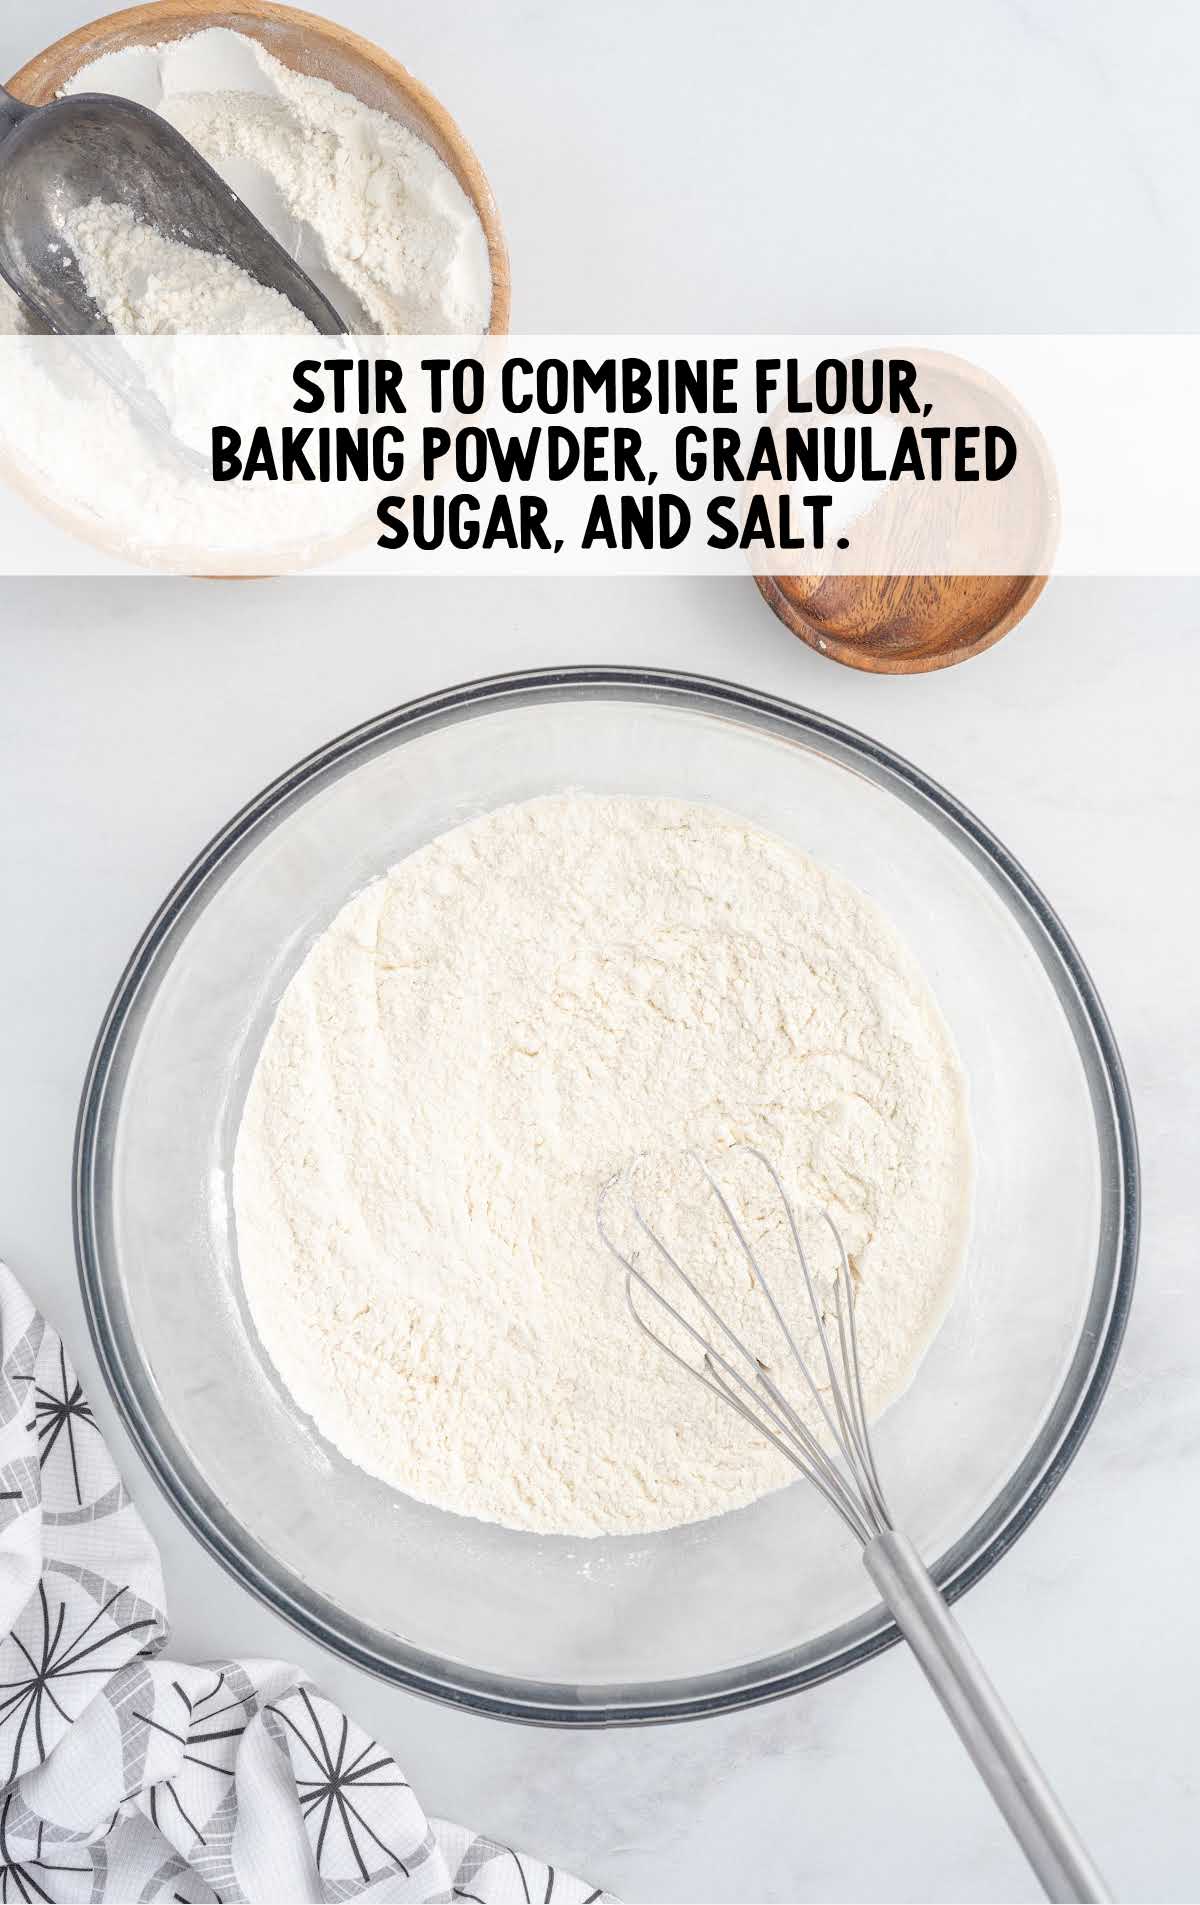 all-purpose flour, baking powder, granulated sugar, and salt combined in a bowl